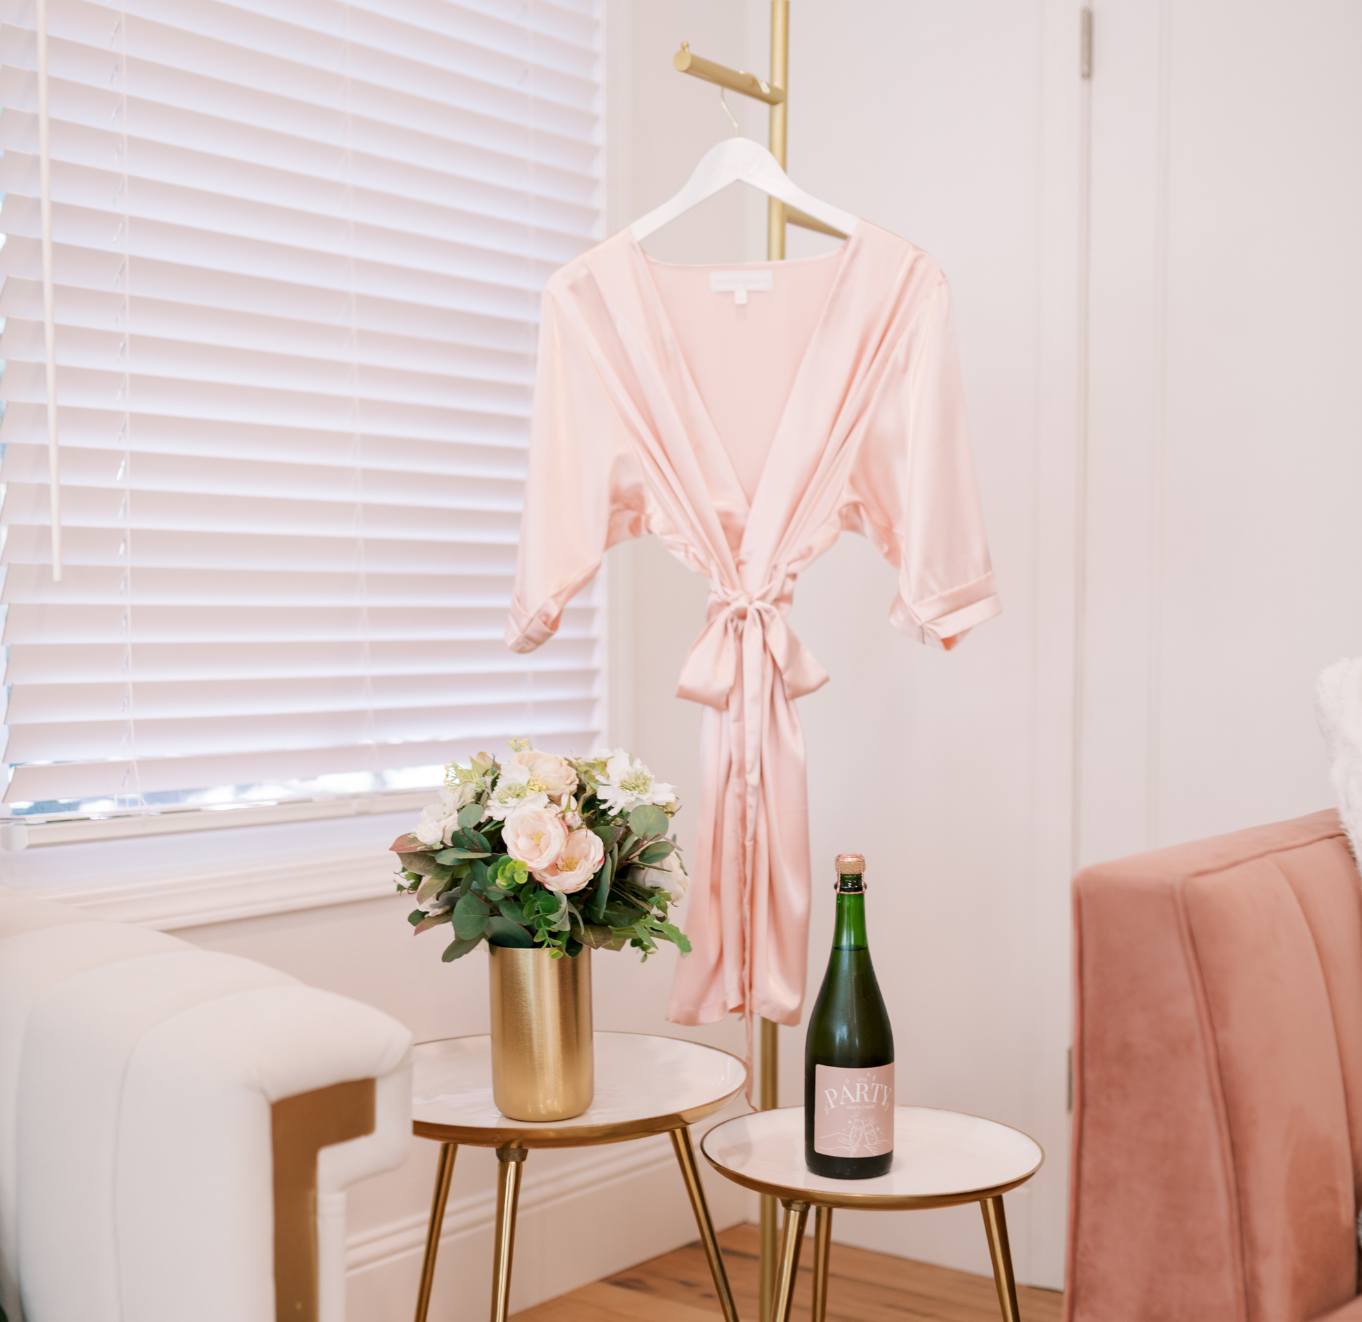 Robe and Rosé appointment Upgrade at Charlotte's